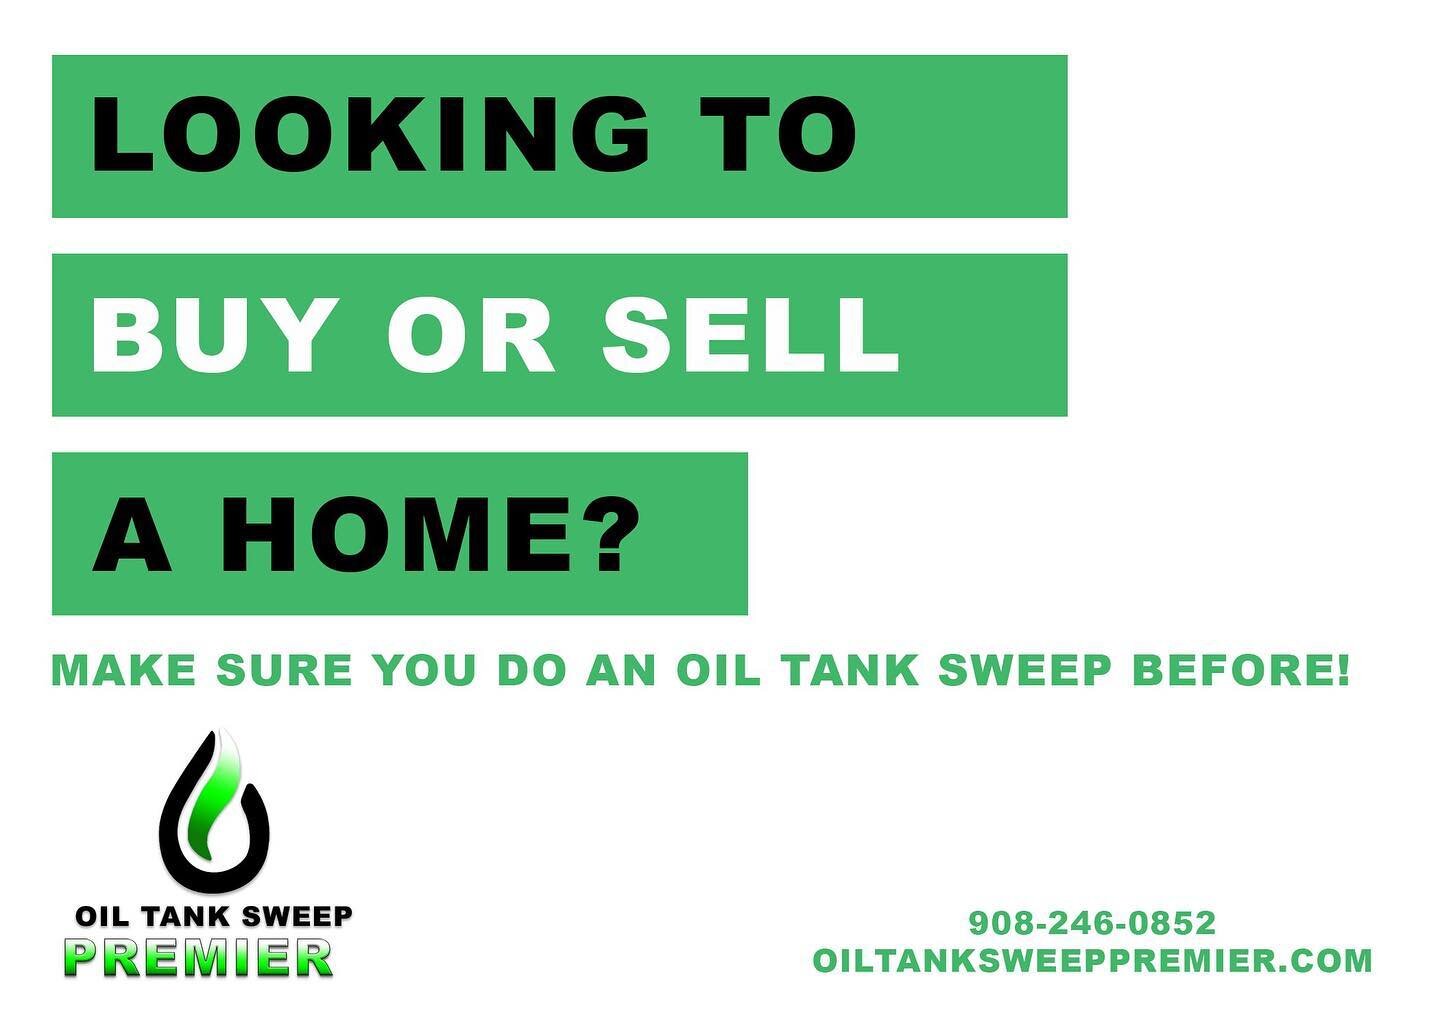 No matter the home, what the records says. Do your own Oil Tank Sweep. Protect yourself with a guarantee.

.
#oiltanksweeppremier#oiltanksweep#tanksweep#undergroundtanksweep#oiltankscan#oiltankremoval#exploratorydig#realestate#homesale#homeinspection